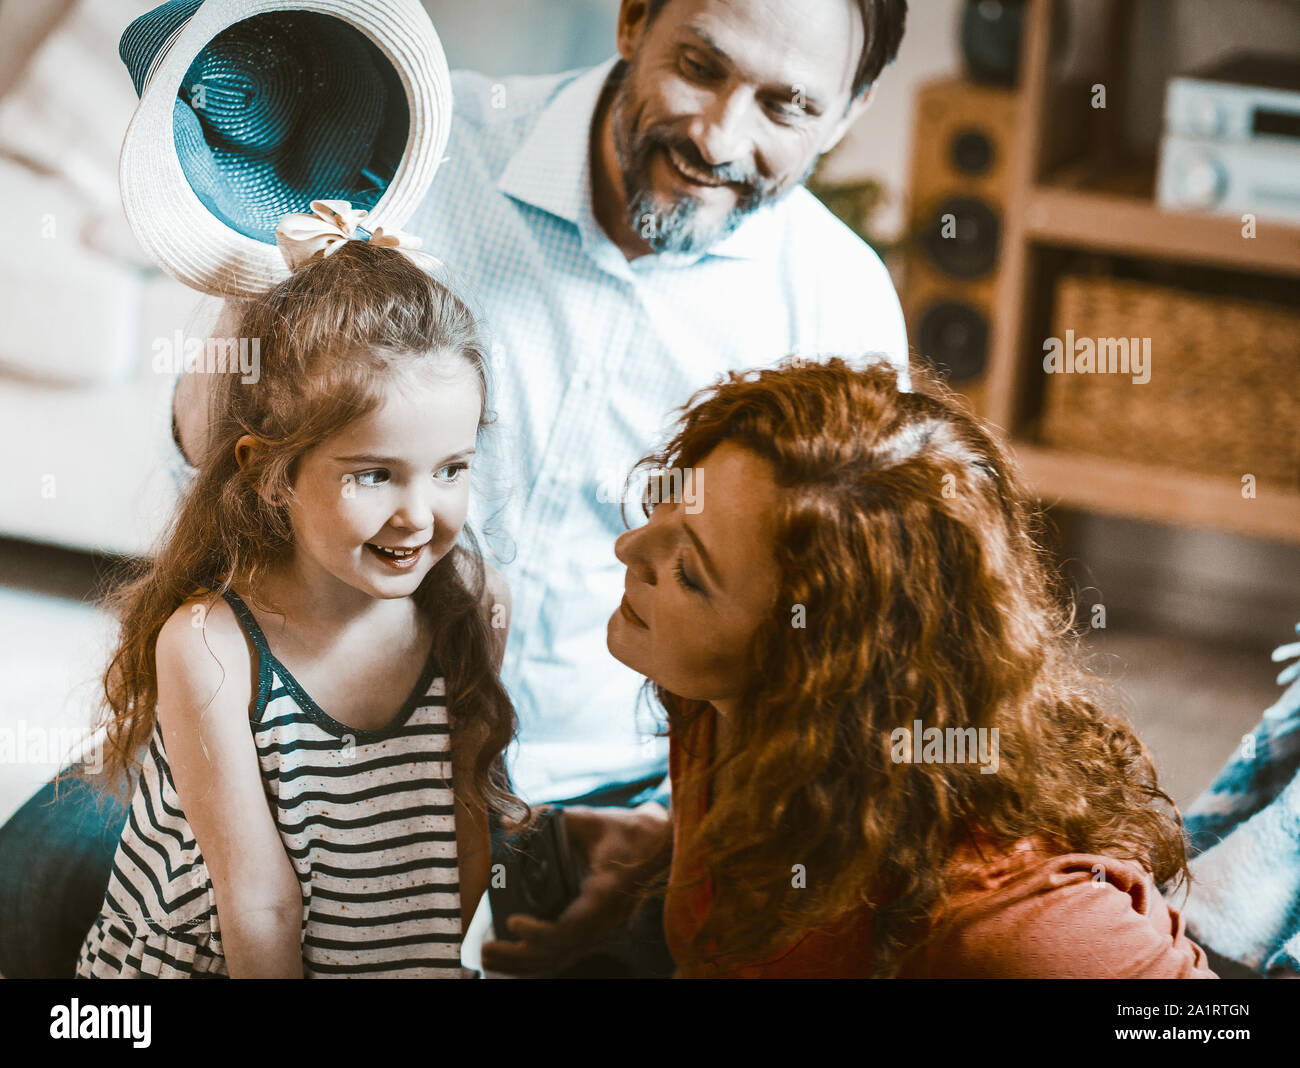 Family portrait mom dad and cute liitle daughter. Stock Photo